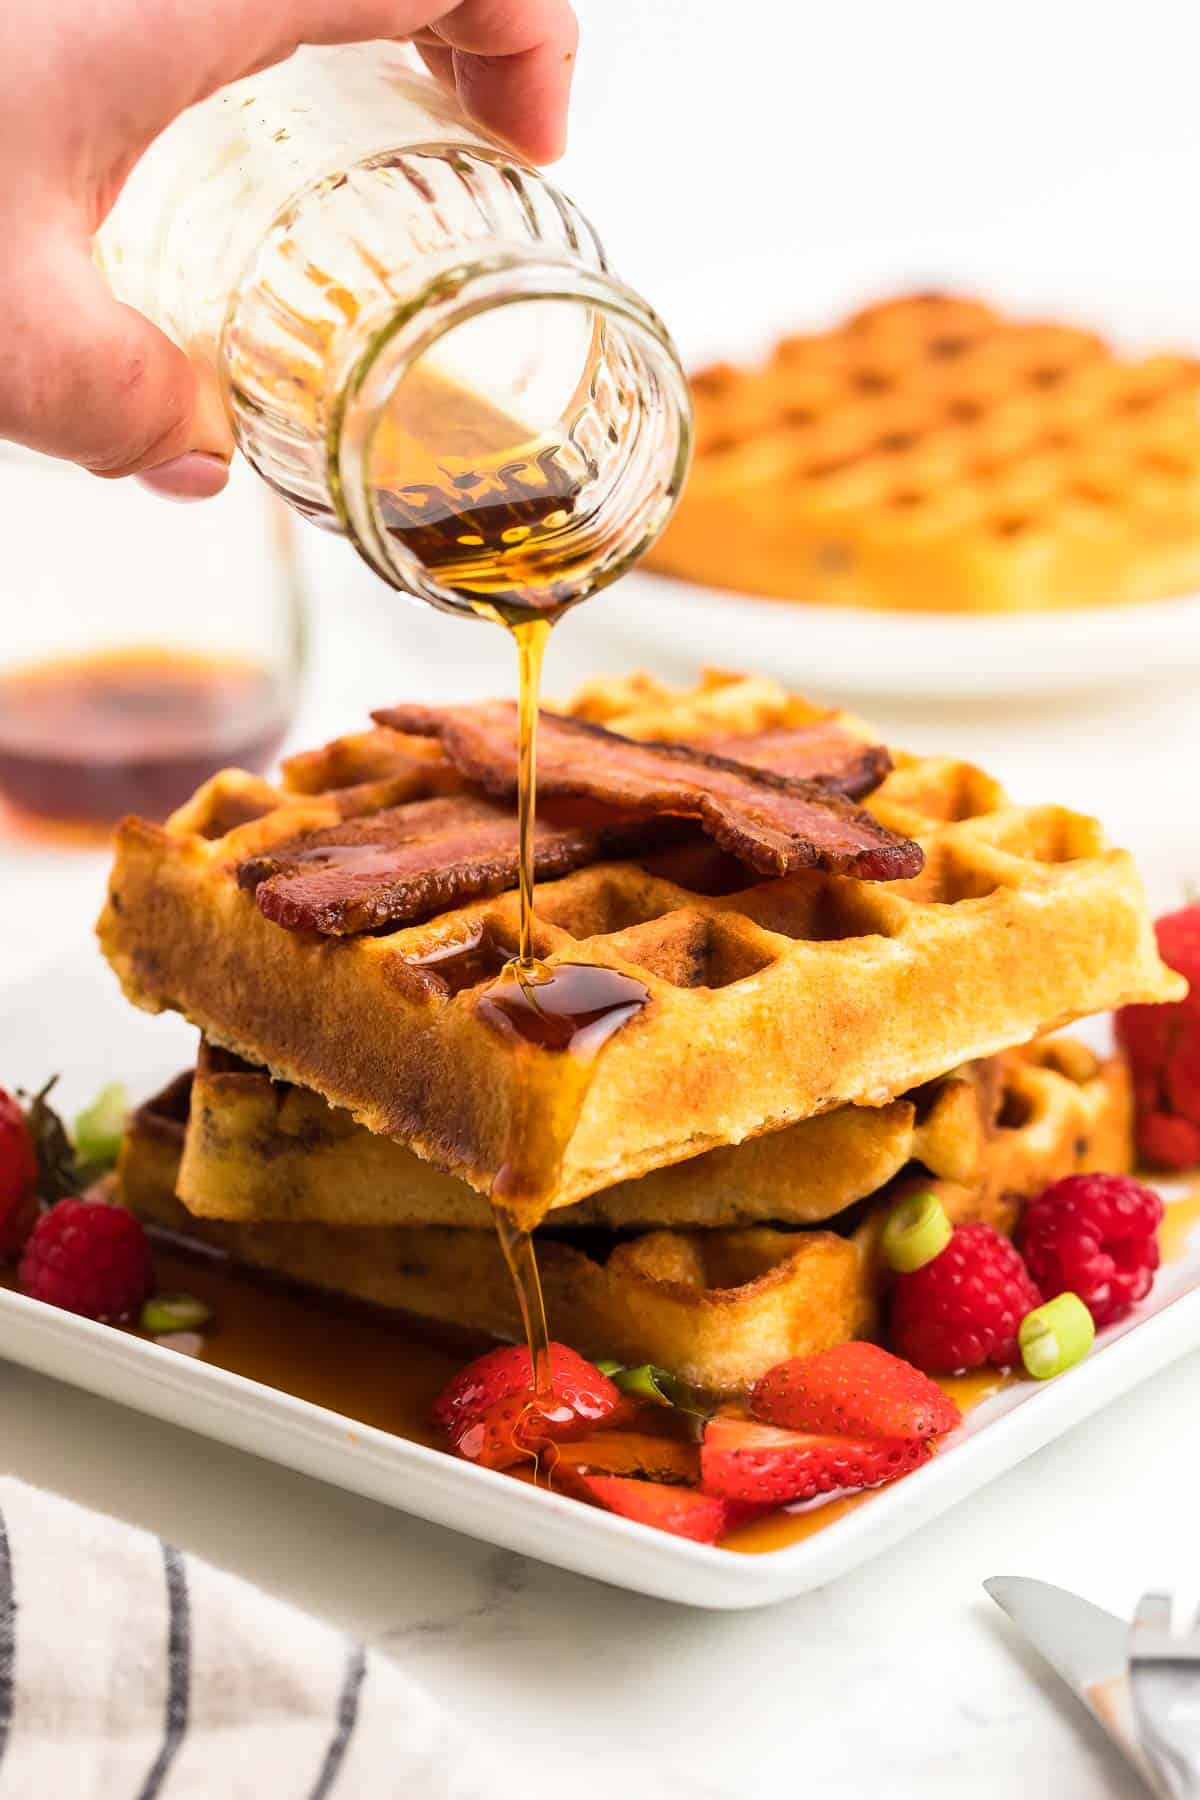 drizzling warm maple syrup over the waffles